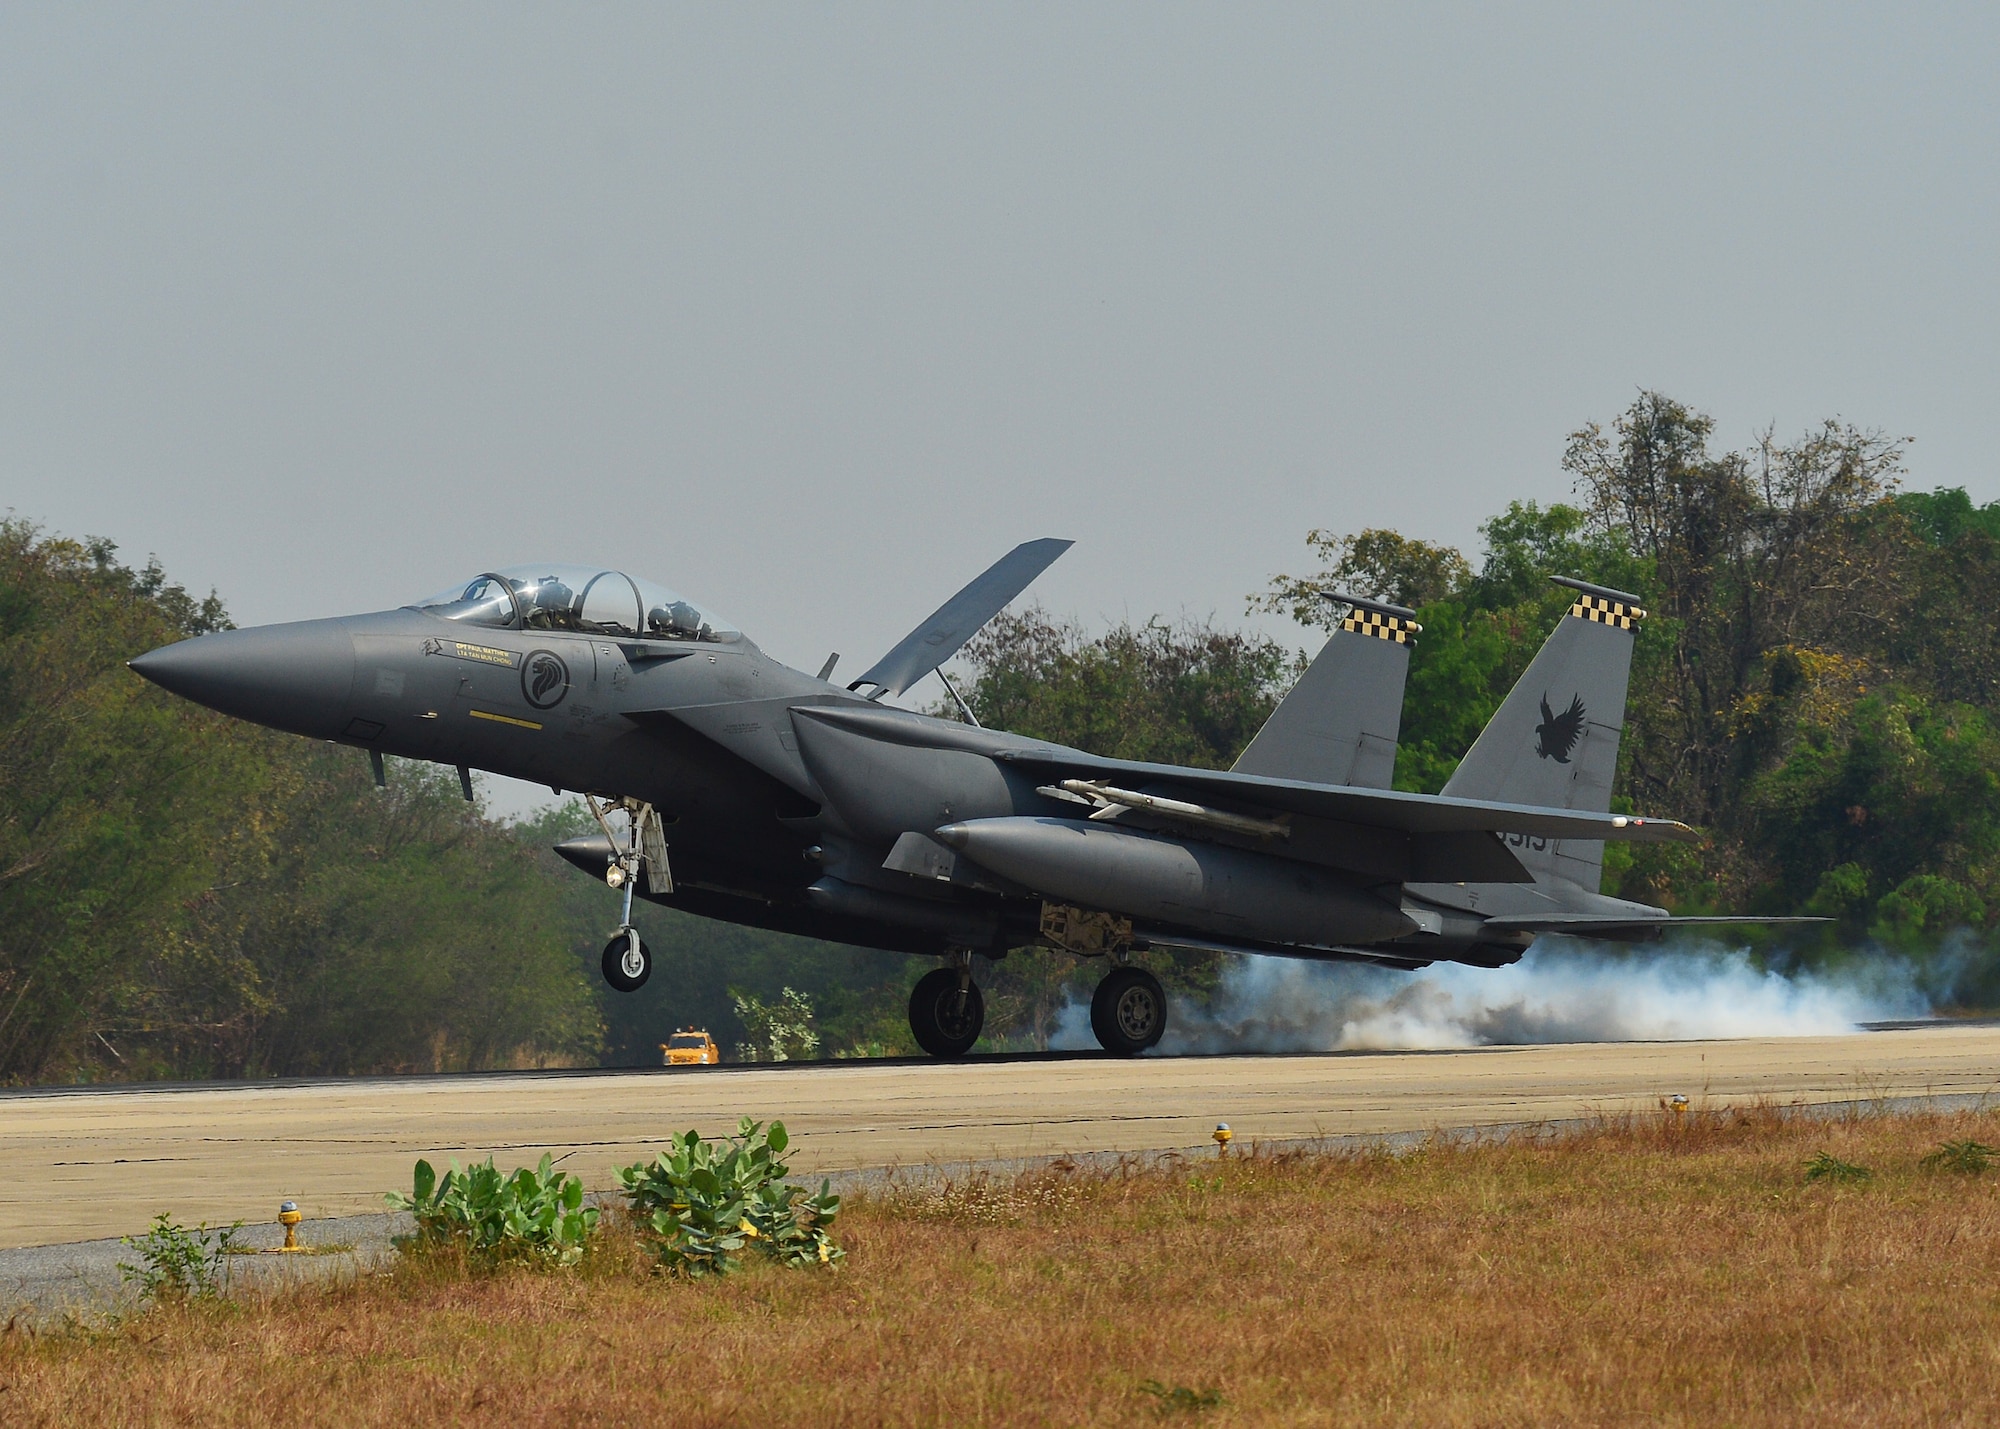 A Republic of Singapore Air Force F-15 Eagle lands during Exercise Cope Tiger 16, on Korat Royal Thai Air Force Base, Thailand, March 11, 2016. Exercise Cope Tiger 16 includes over 1,200 personnel from three countries and continues the growth of strong, interoperable and beneficial relationships within the Asia-Pacific Region, while demonstrating U.S. capability to project forces strategically in a combined, joint environment. (U.S. Air Force Photo by Tech Sgt. Aaron Oelrich/Released)